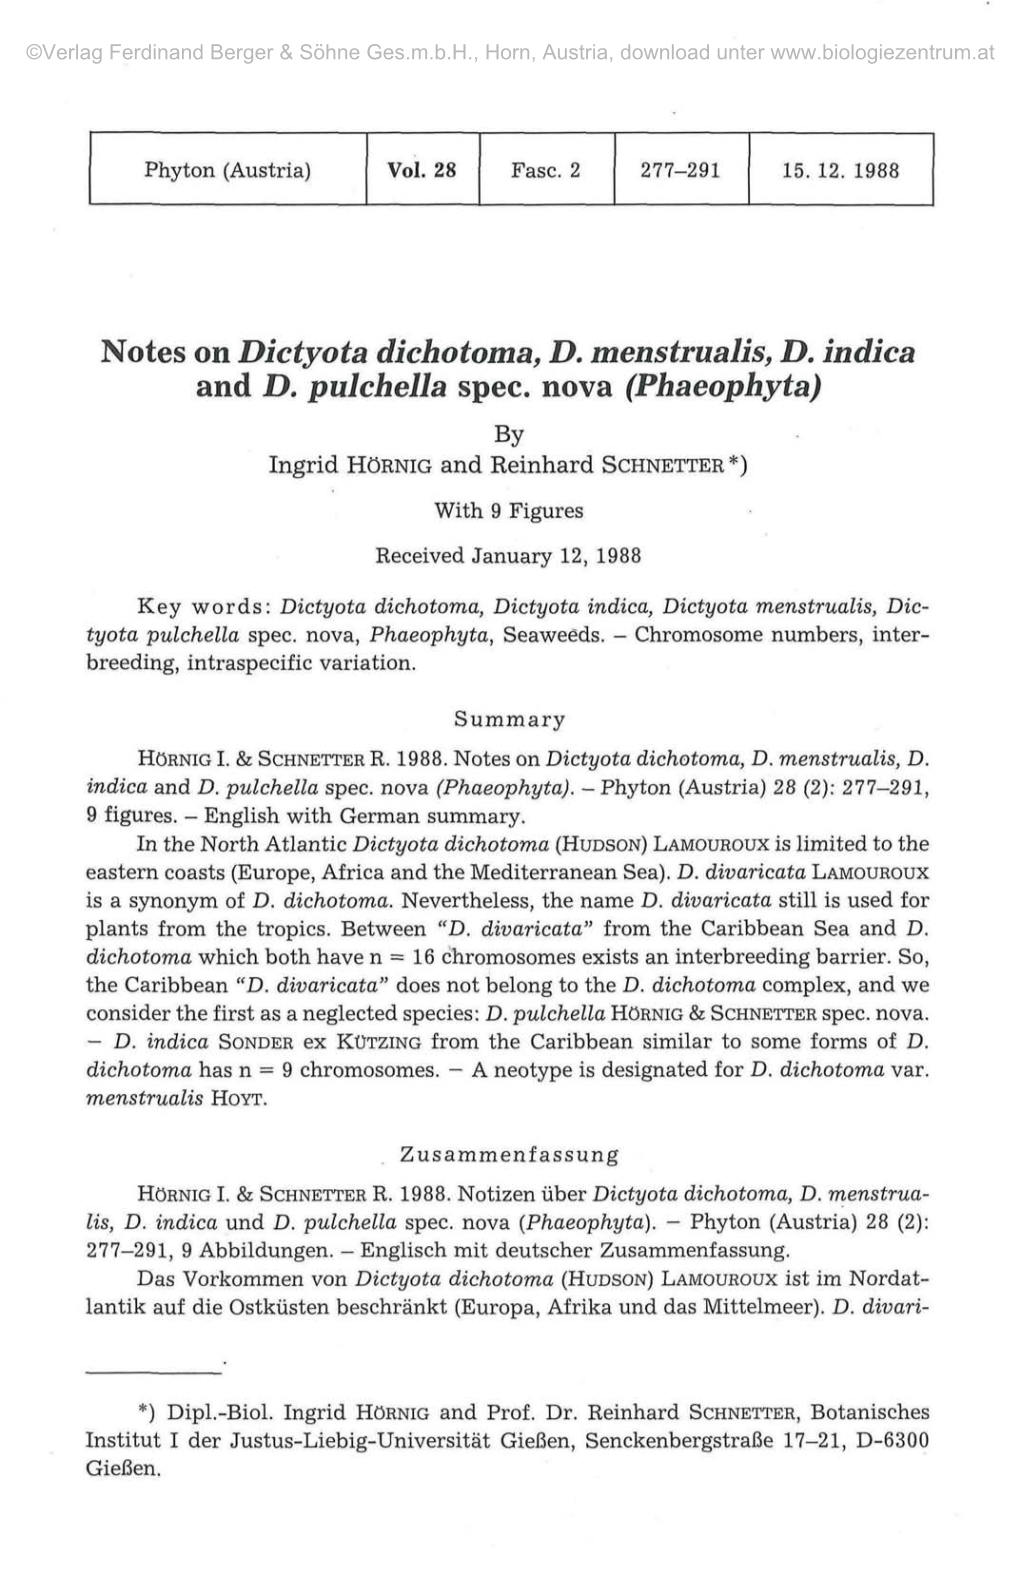 Notes on Dictyota Dichotoma, D. Menstrualis, D. Indica and D